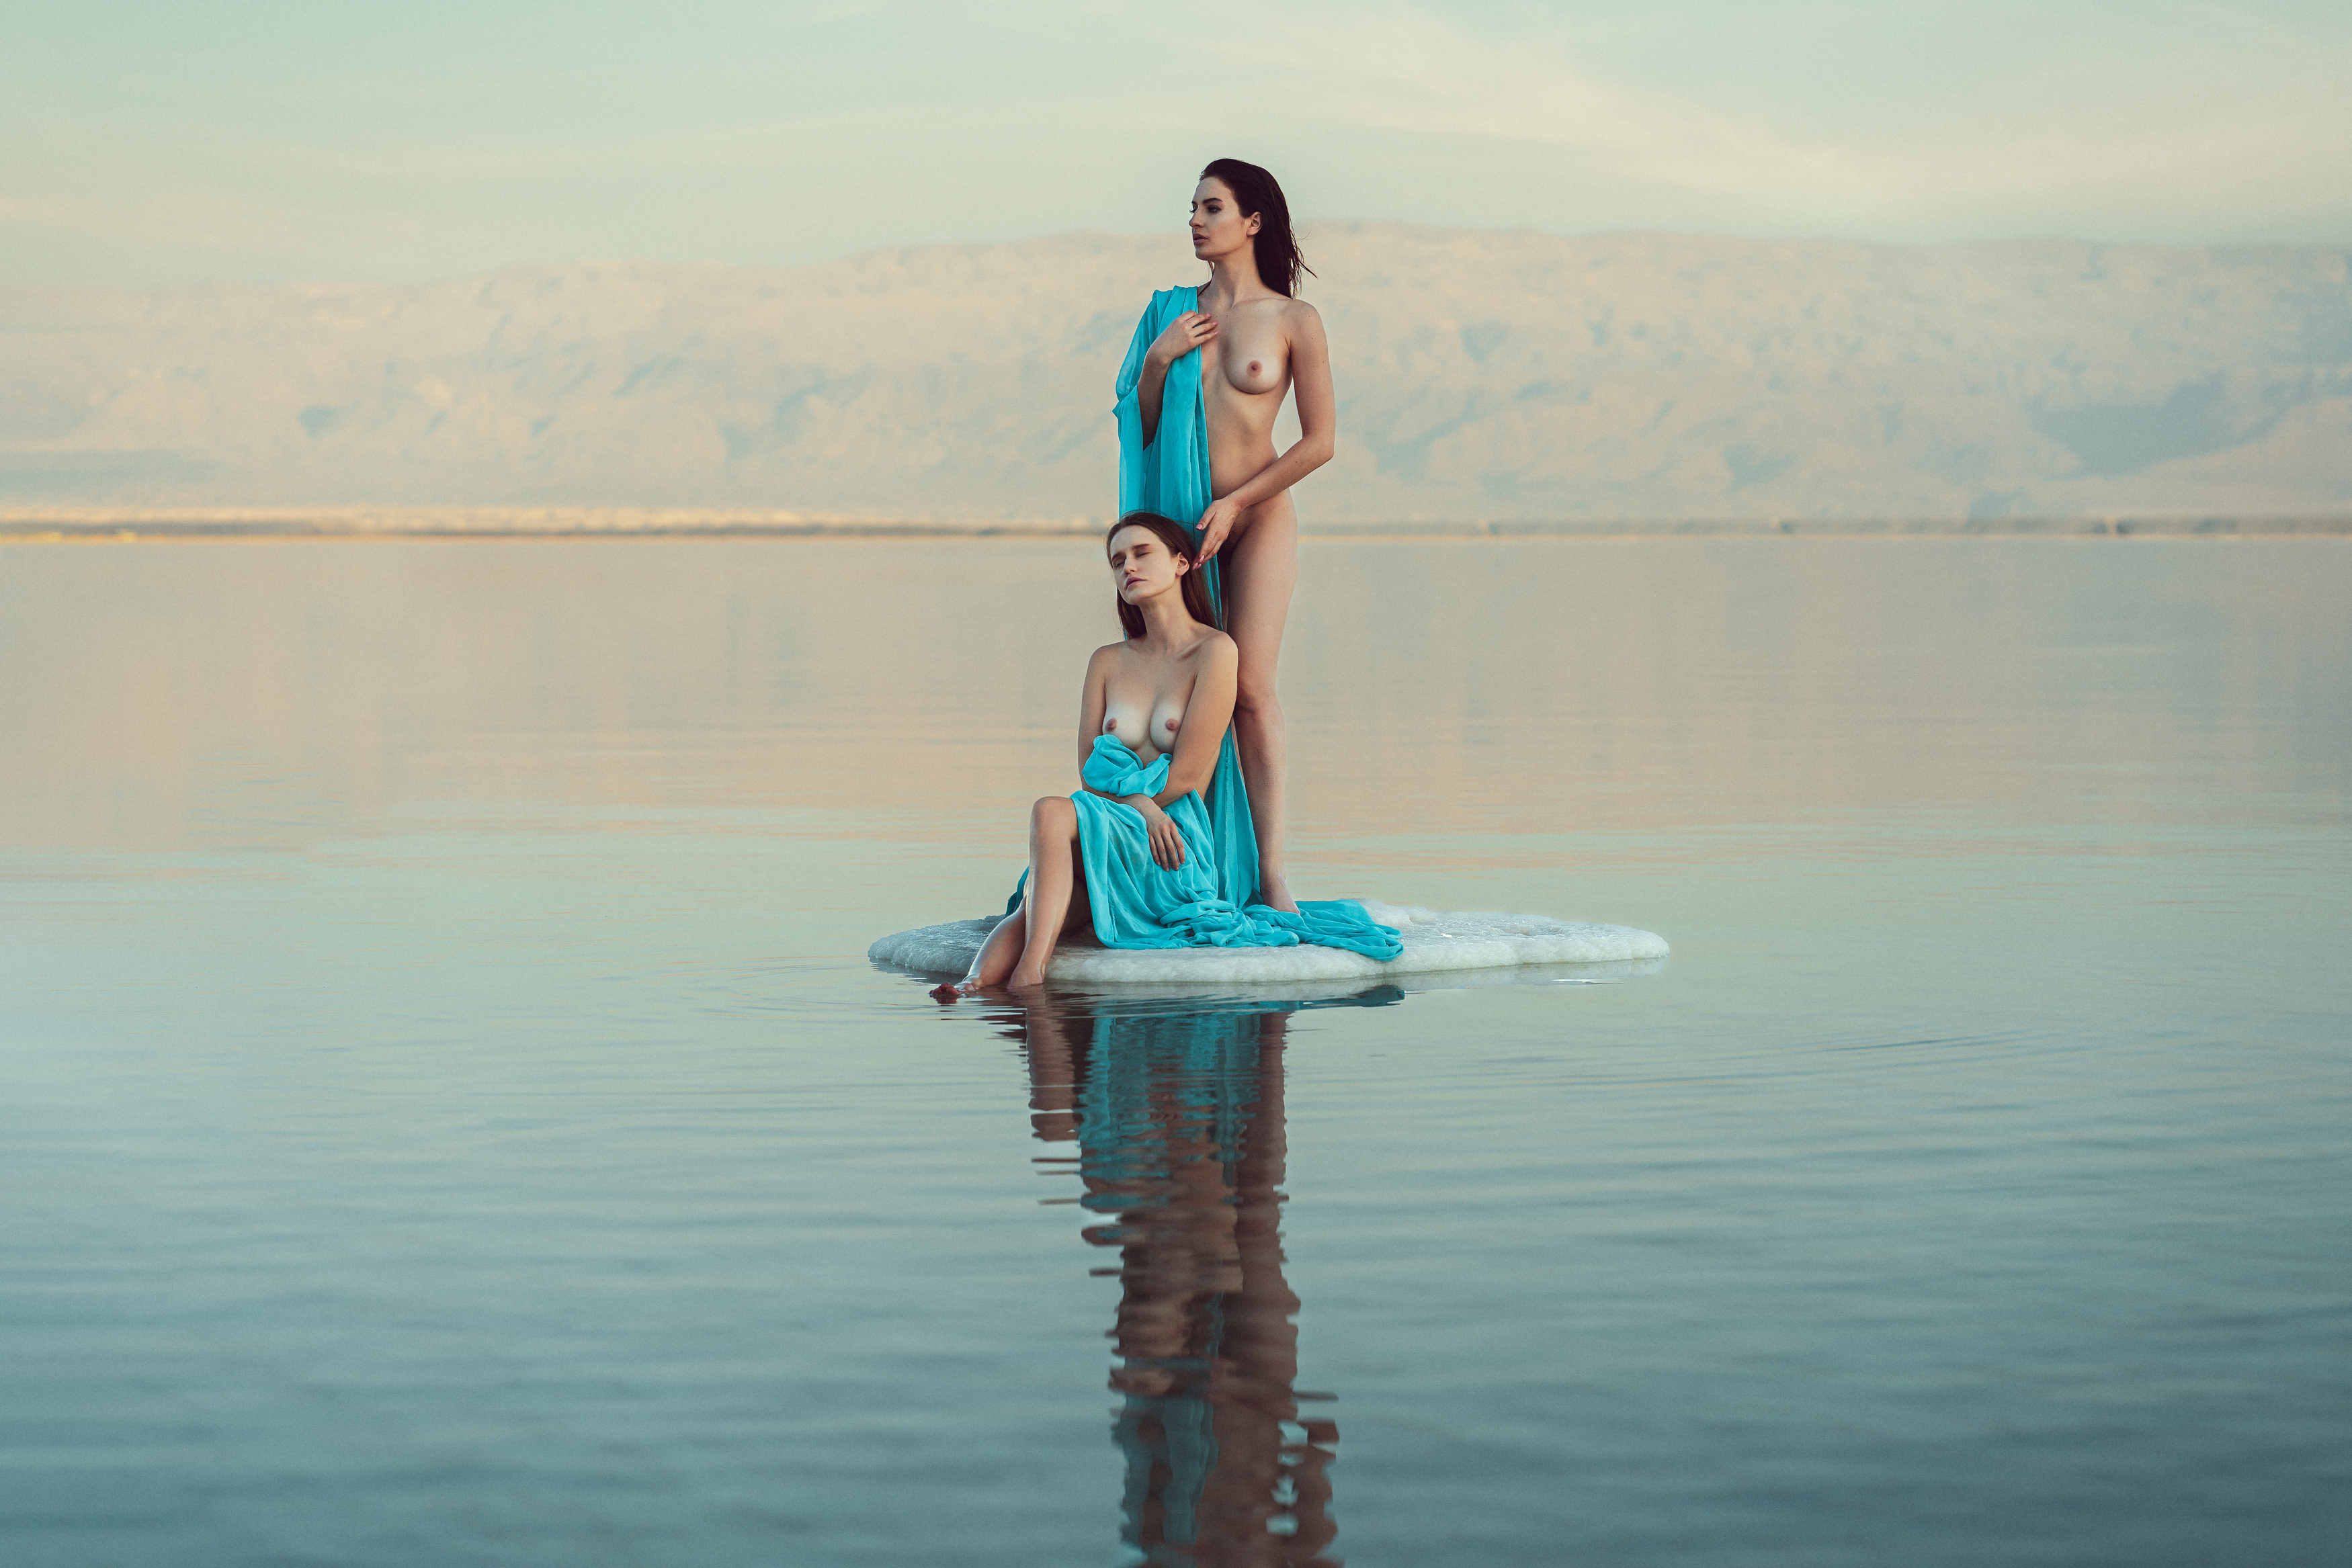 beauty, dead sea, dreaminess, elegance, enjoyment, femininity, front view, grace, lifestyles, looking, mountains, nude, outdoors, pair, pose, reflections, relaxation, salt, seductive women, sensuality, sitting, sky, standing, two, veil, water, young women, Alex Tsarfin